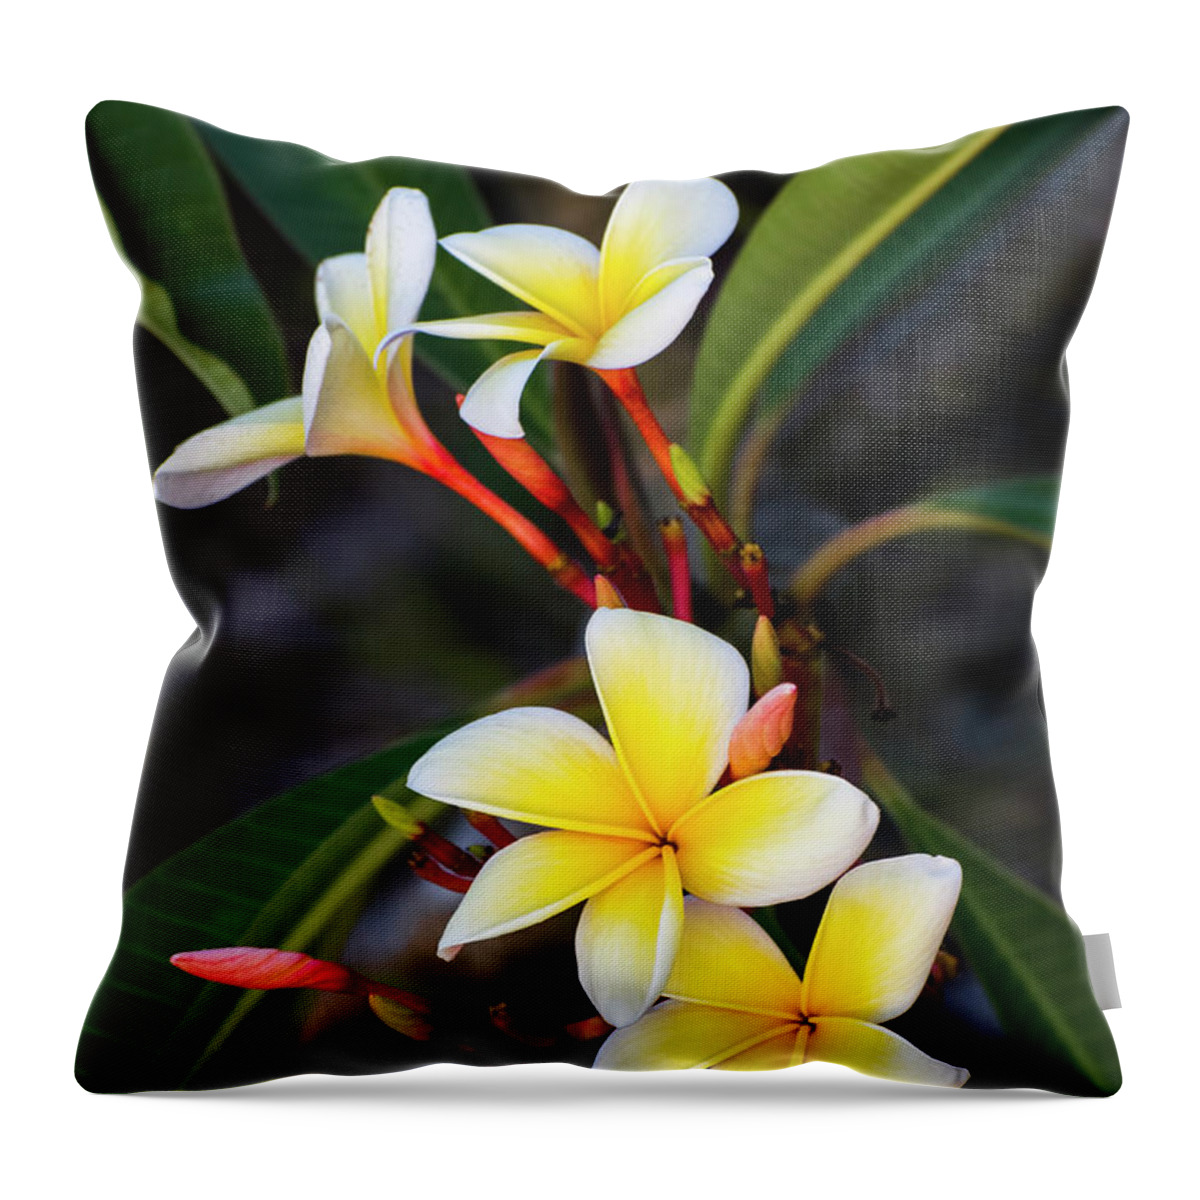 Frangipani Throw Pillow featuring the photograph Frangipani Beauty by Ginger Stein